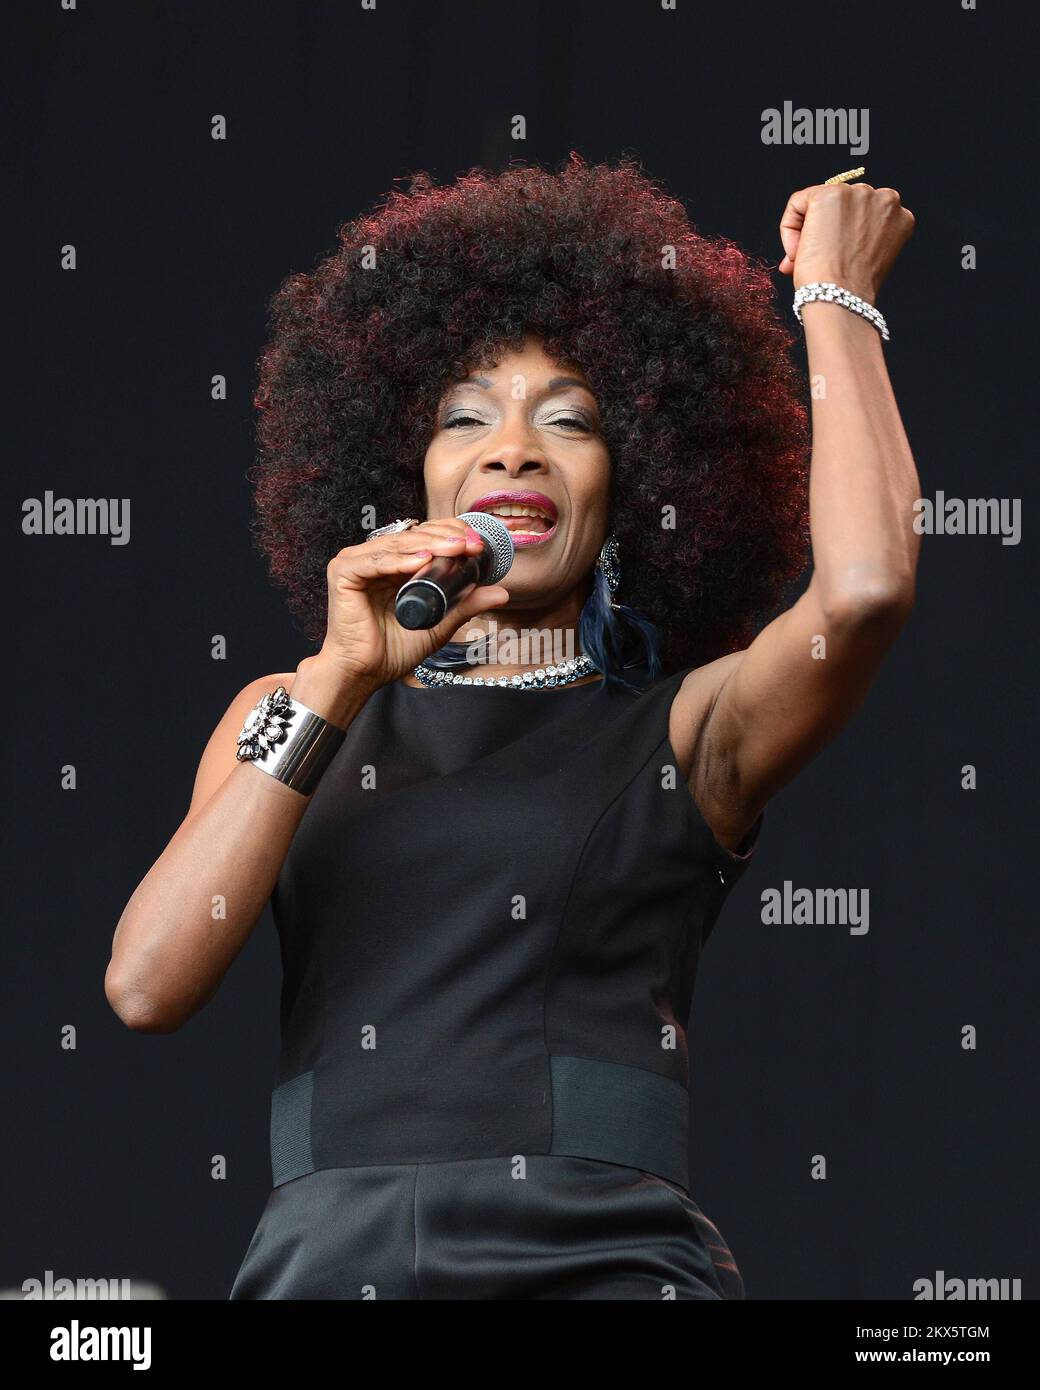 Marcia Barrett, of Boney M, at the Punchestown Music Festival 2017 in Dublin, Ireland. *Not available for publication in Ireland* Stock Photo